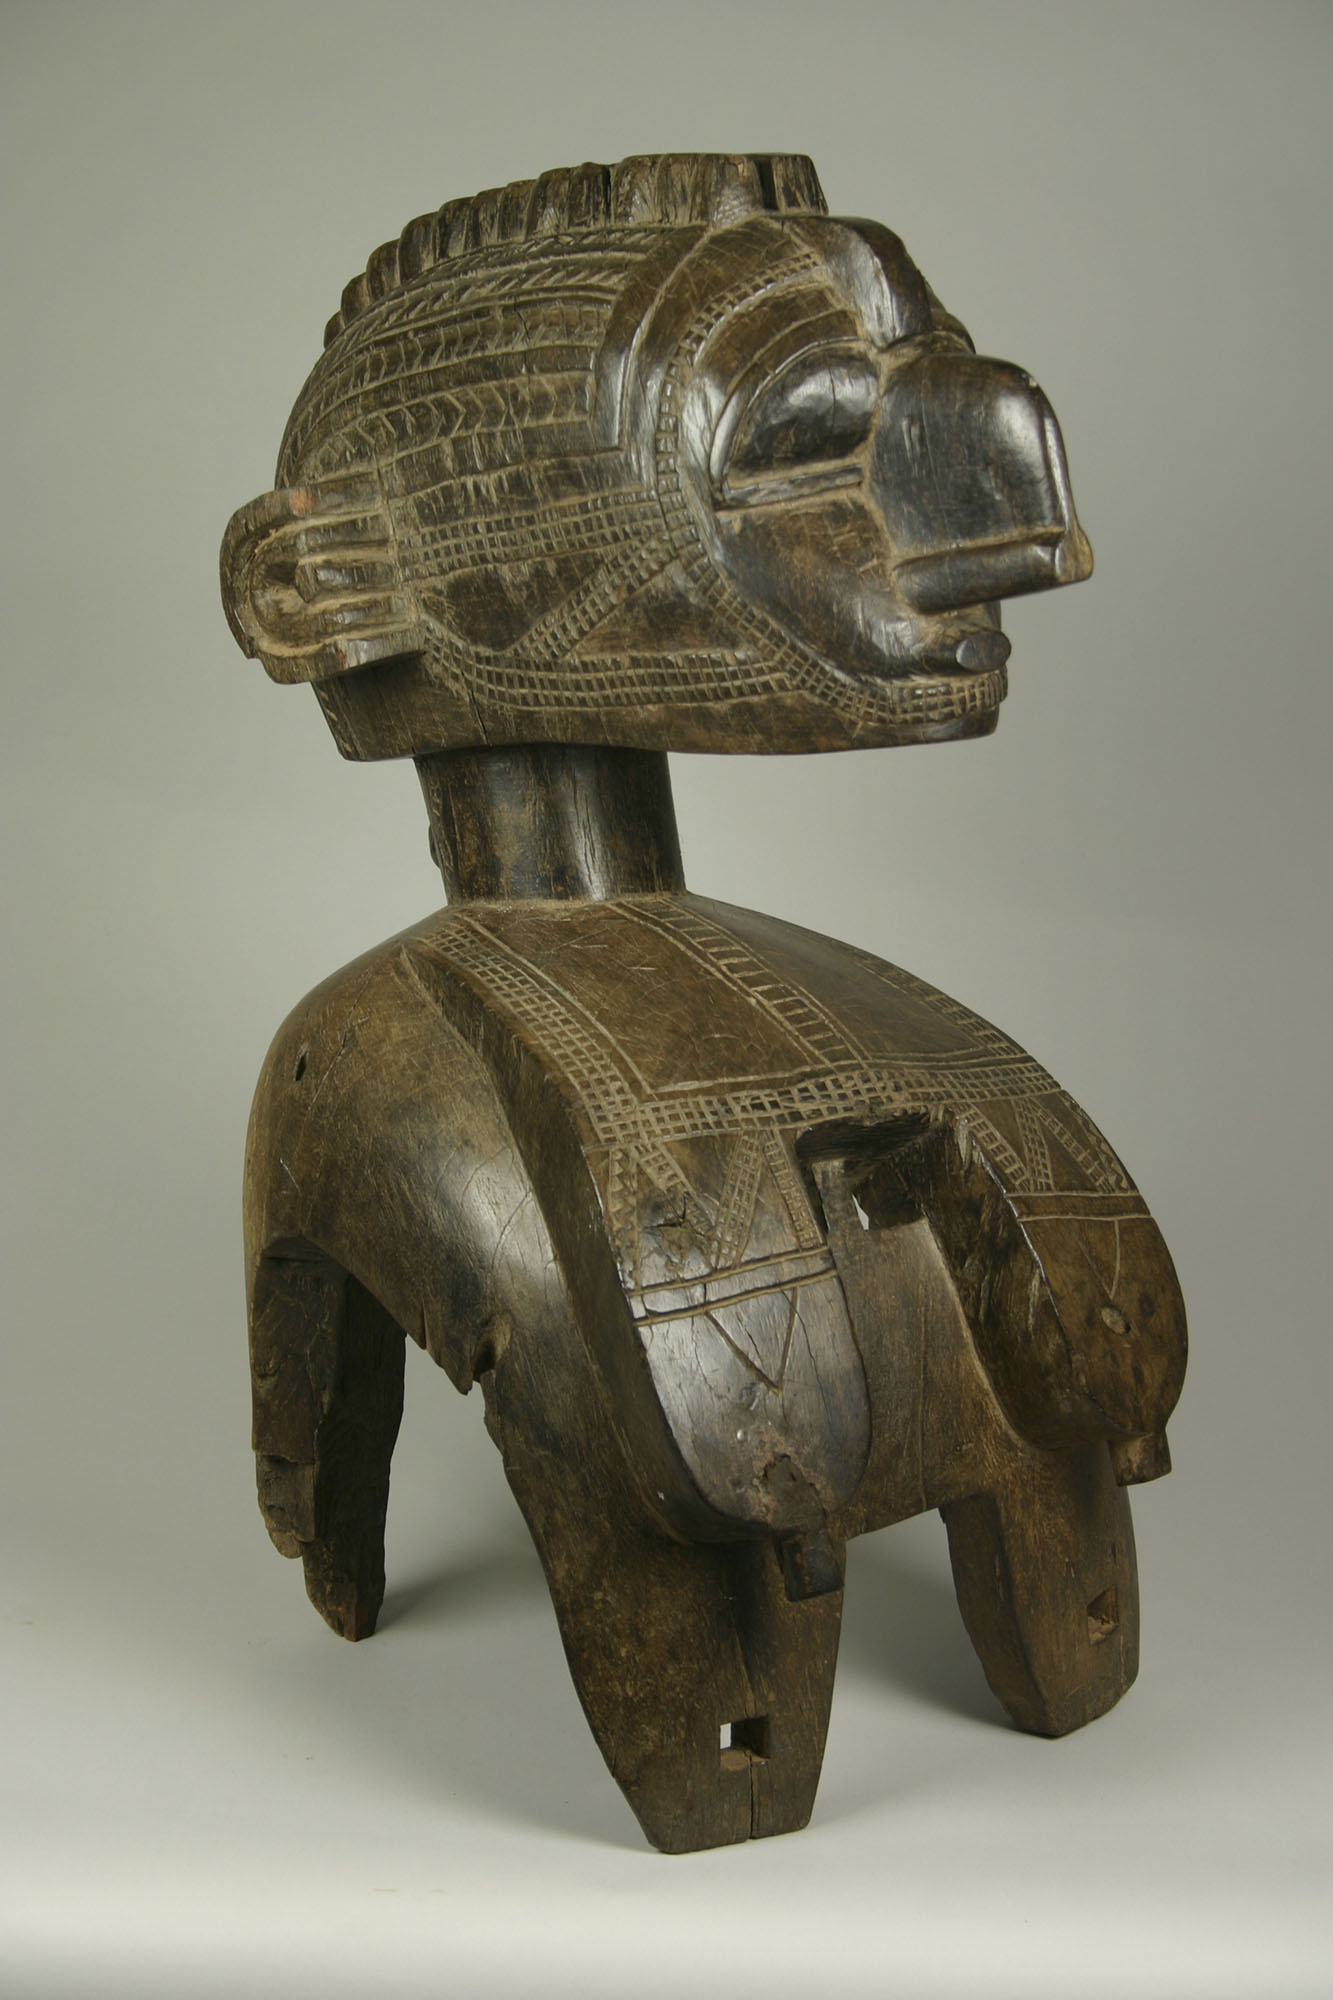 Unidentified artist (Baga; Sierra Leone or Guinea West Africa), Untitled, n.d. Wood. Collection of DePaul Art Museum, gift of the May Weber Foundation, 2001.130